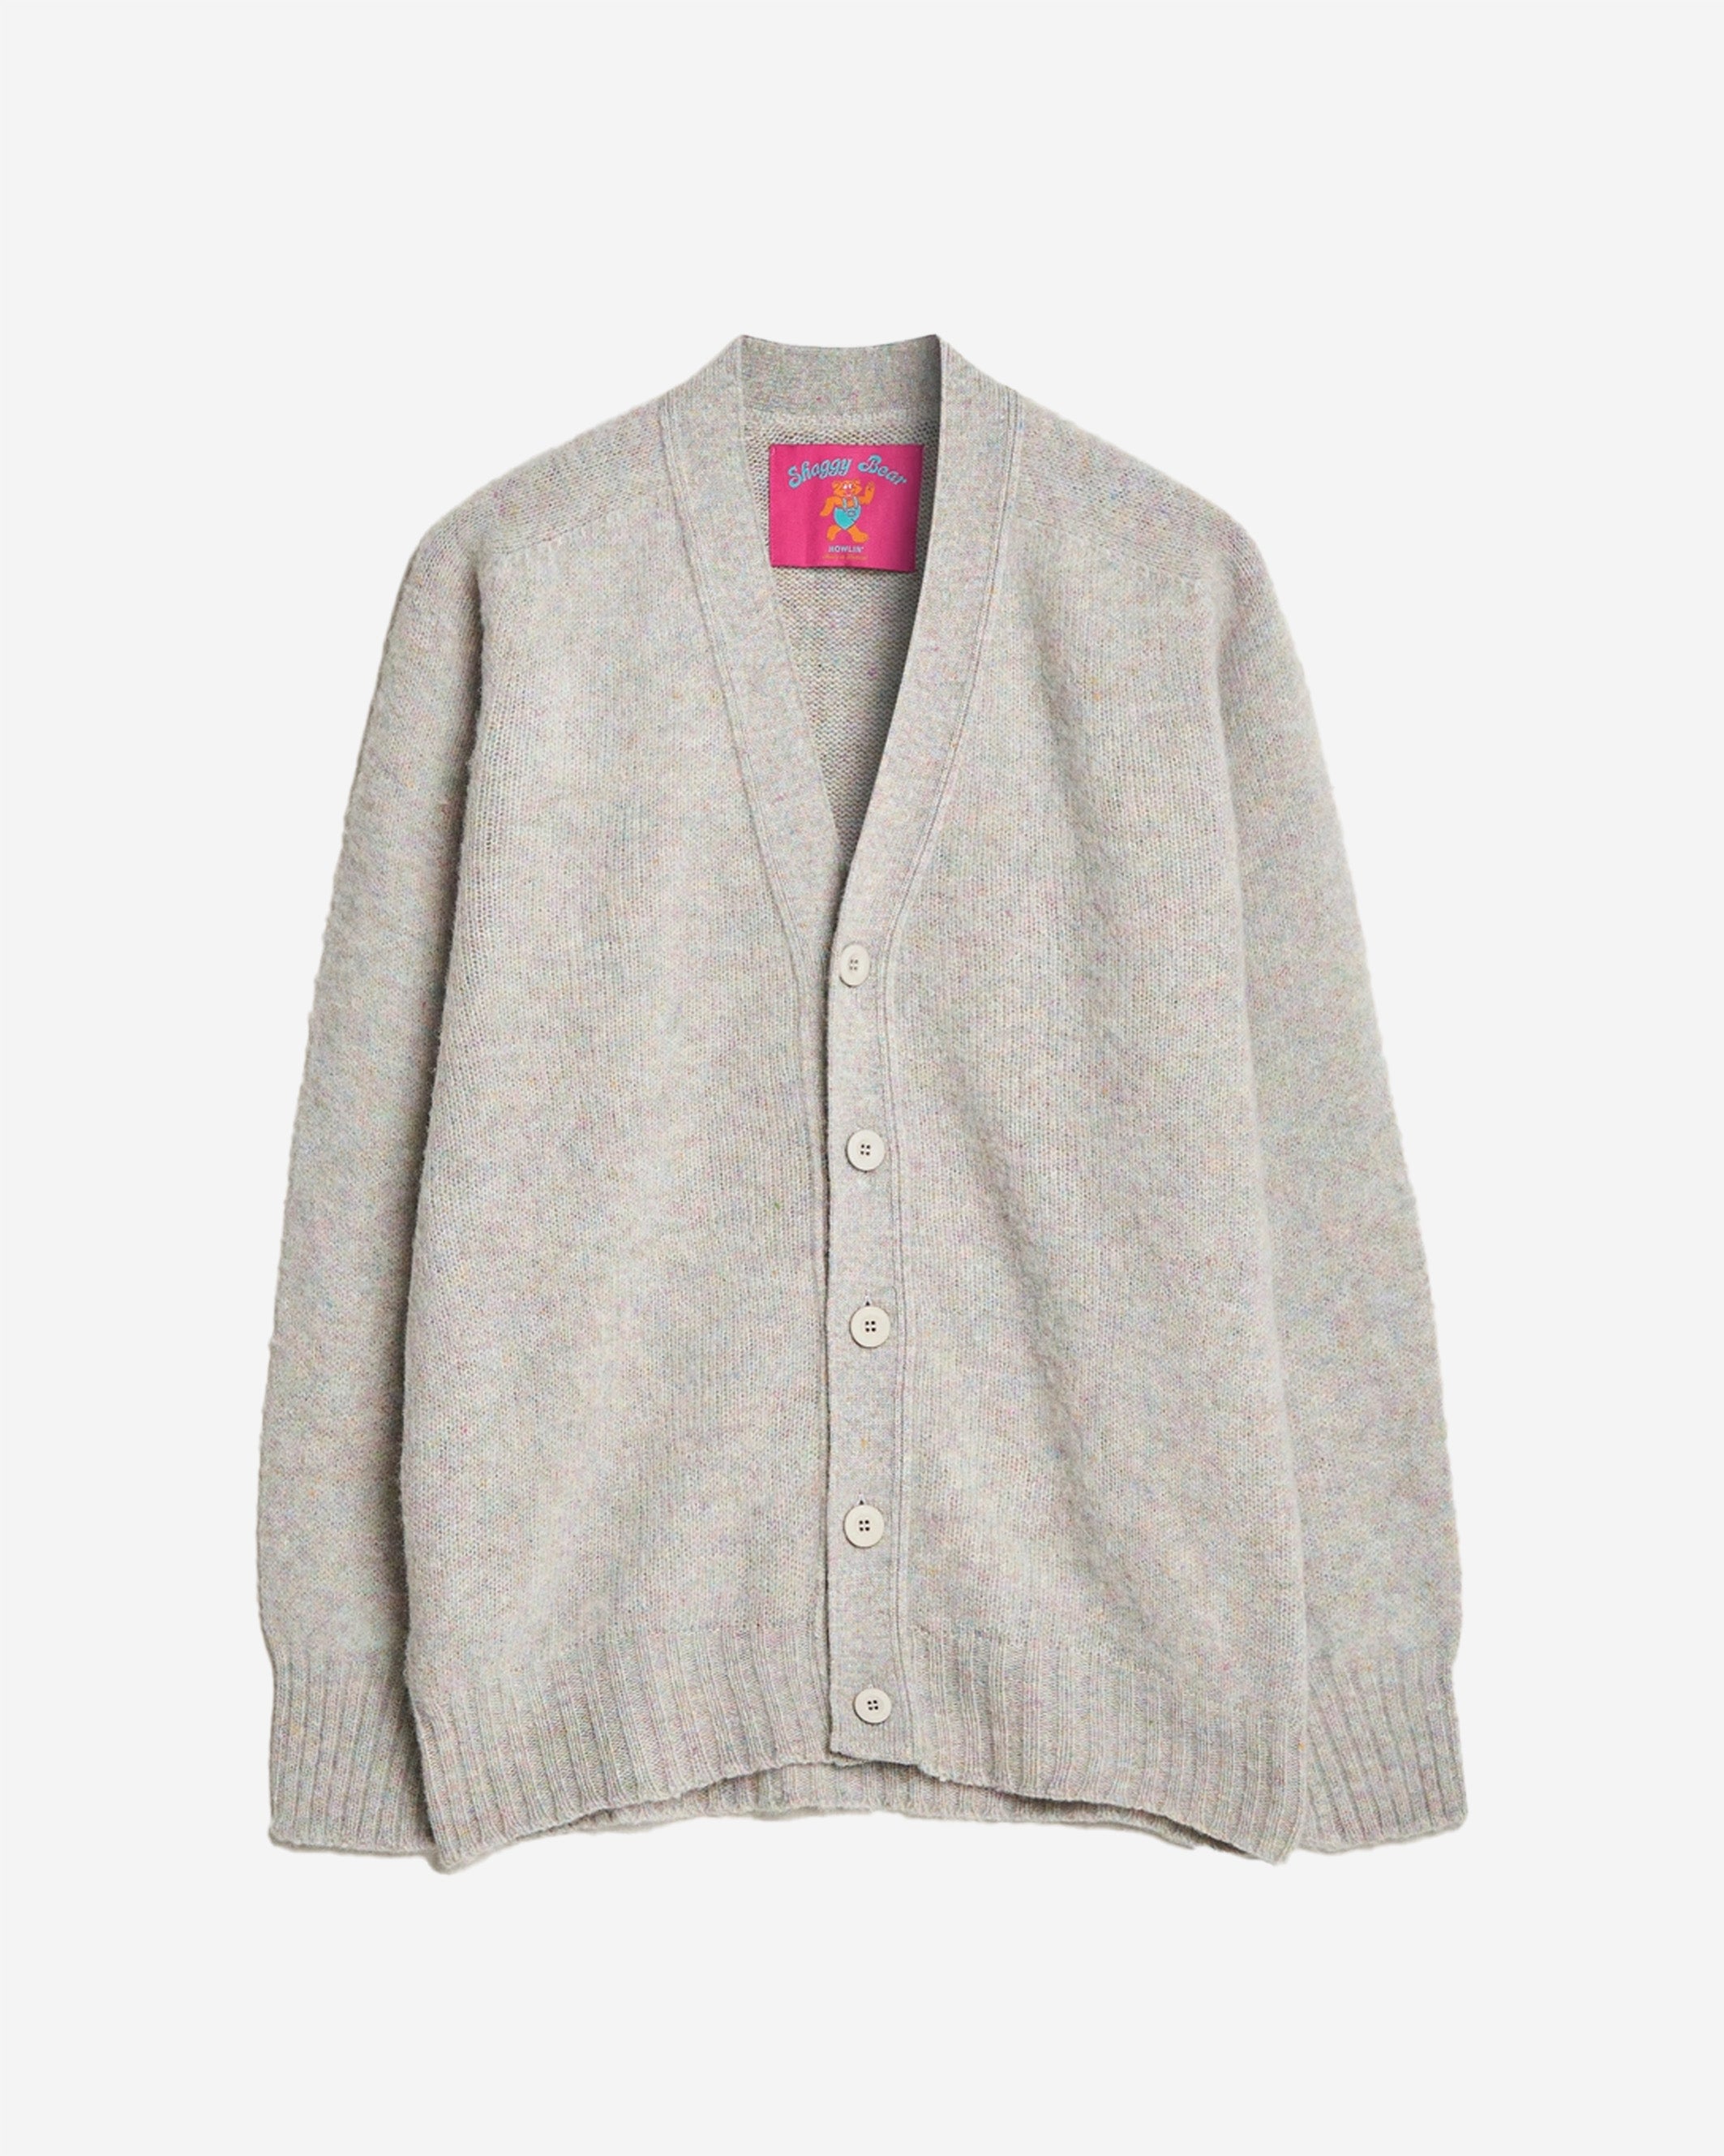 Shaggy Bear Cardigan is a new seasonal highlight of Howlin's winter collection. Double brushed Made out of 100% local Scottish wool. Fully knitted and hand finished in Scotland. Fits regularly.